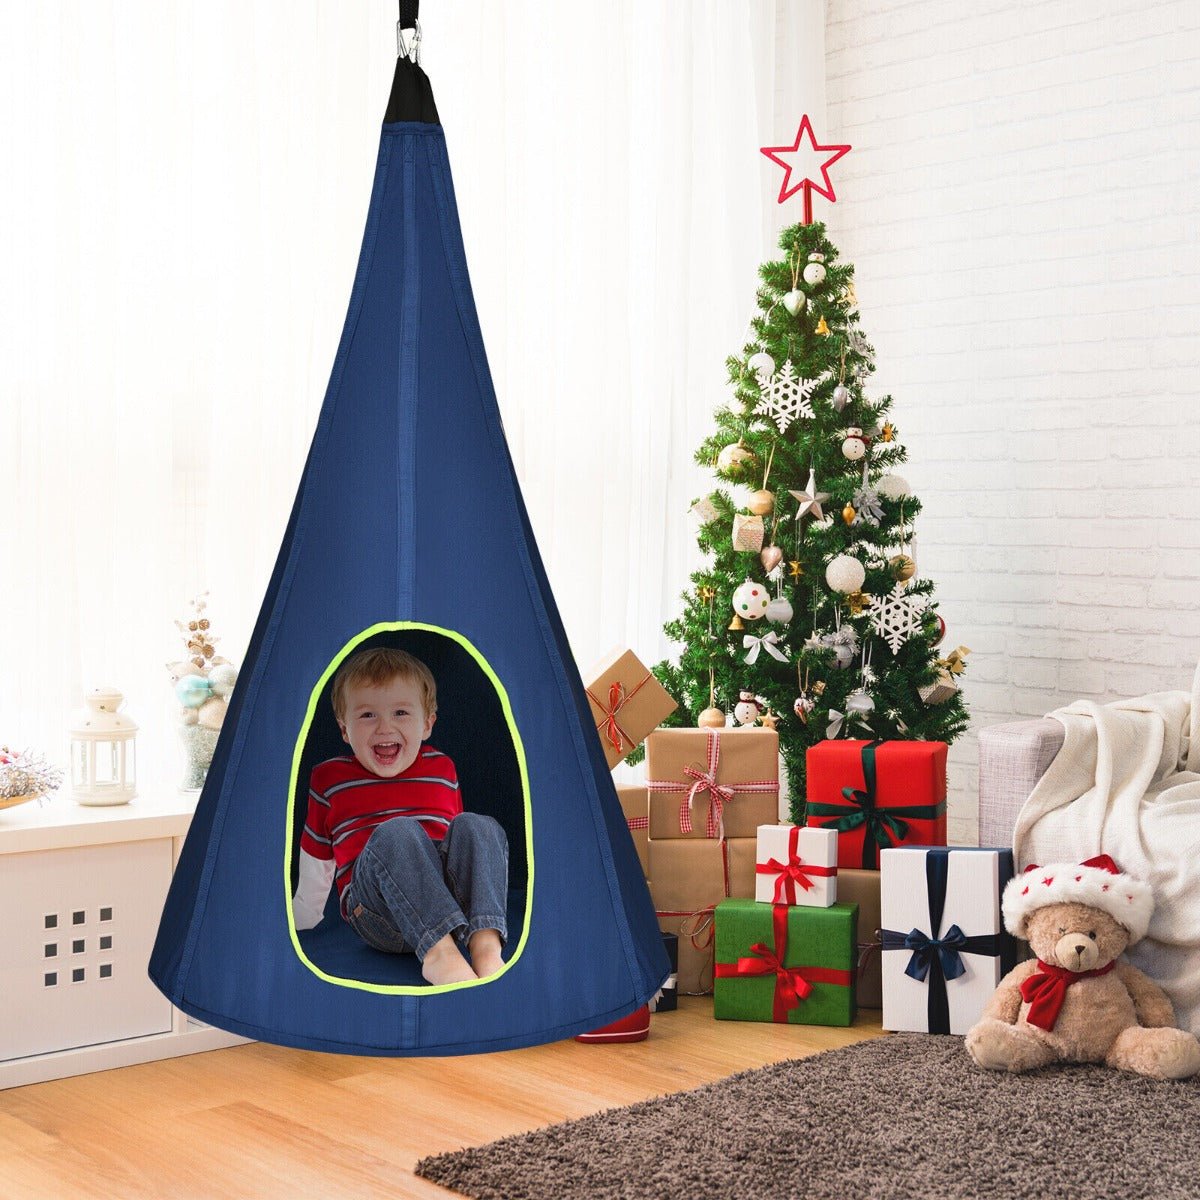 Playful Haven: Kids Nest Swing Tent Blue 80cm for Lively Play